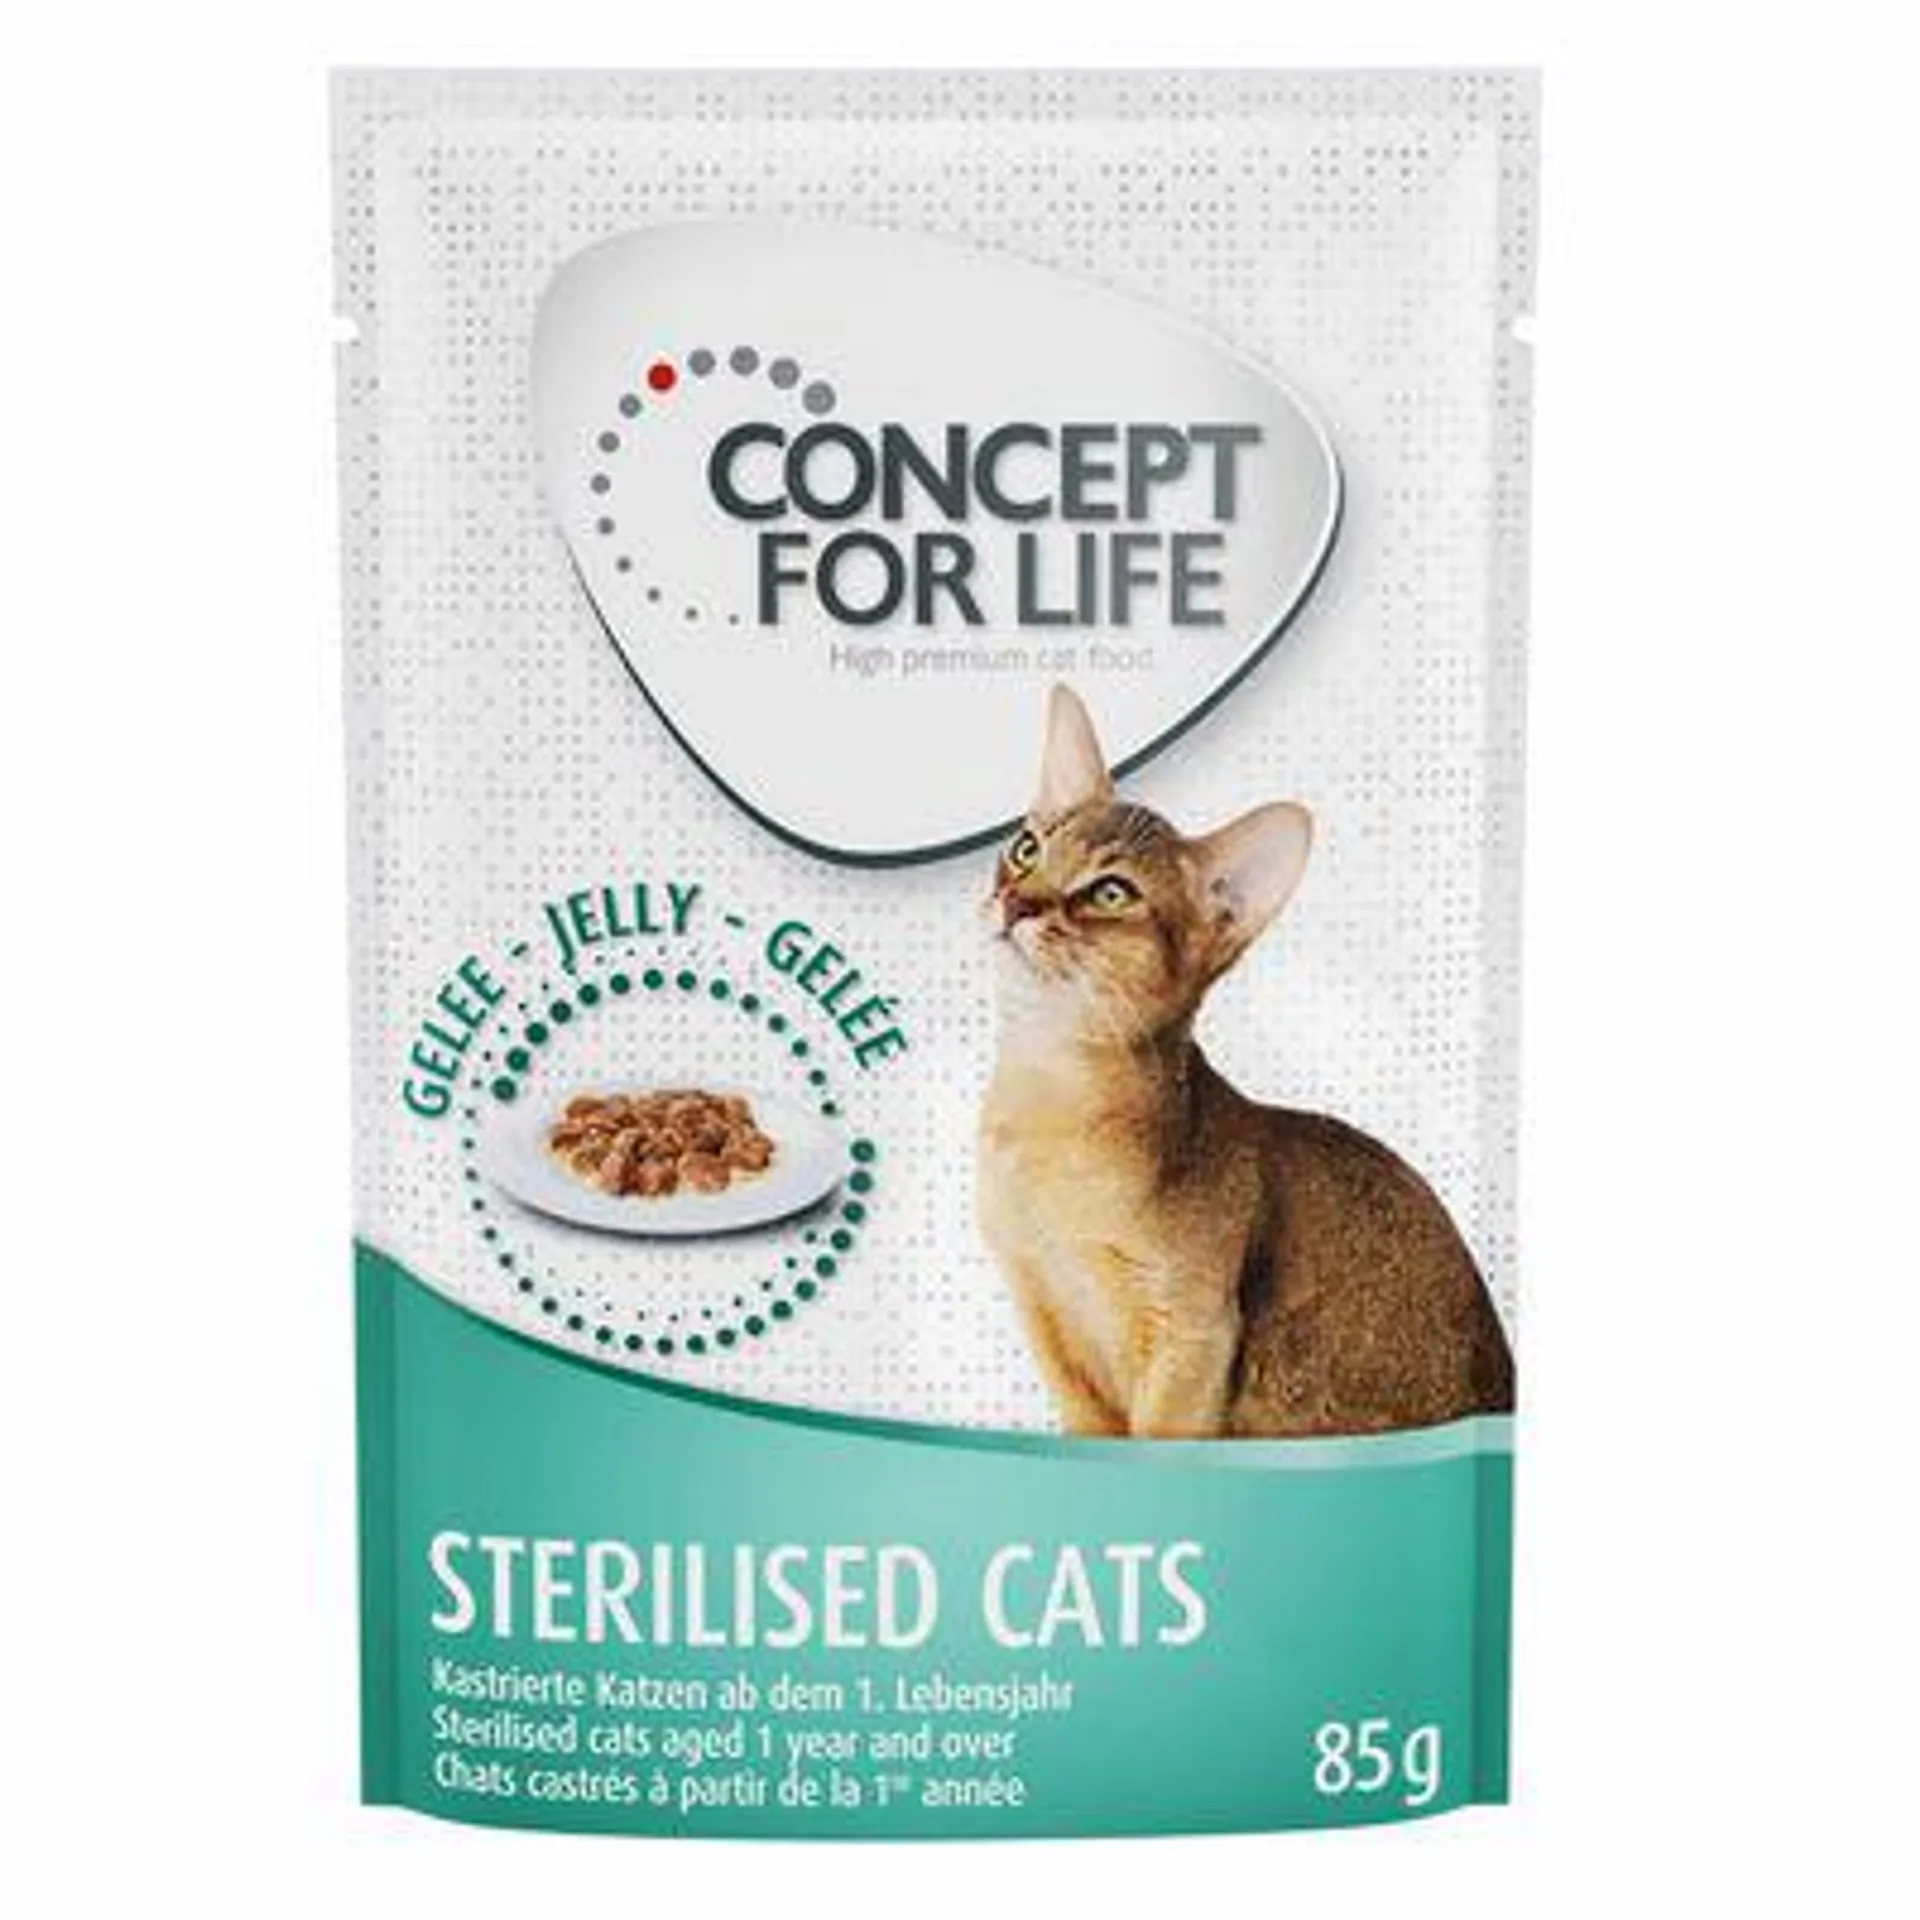 48 x 85g Concept for Life Wet Cat Food - Save £10!*